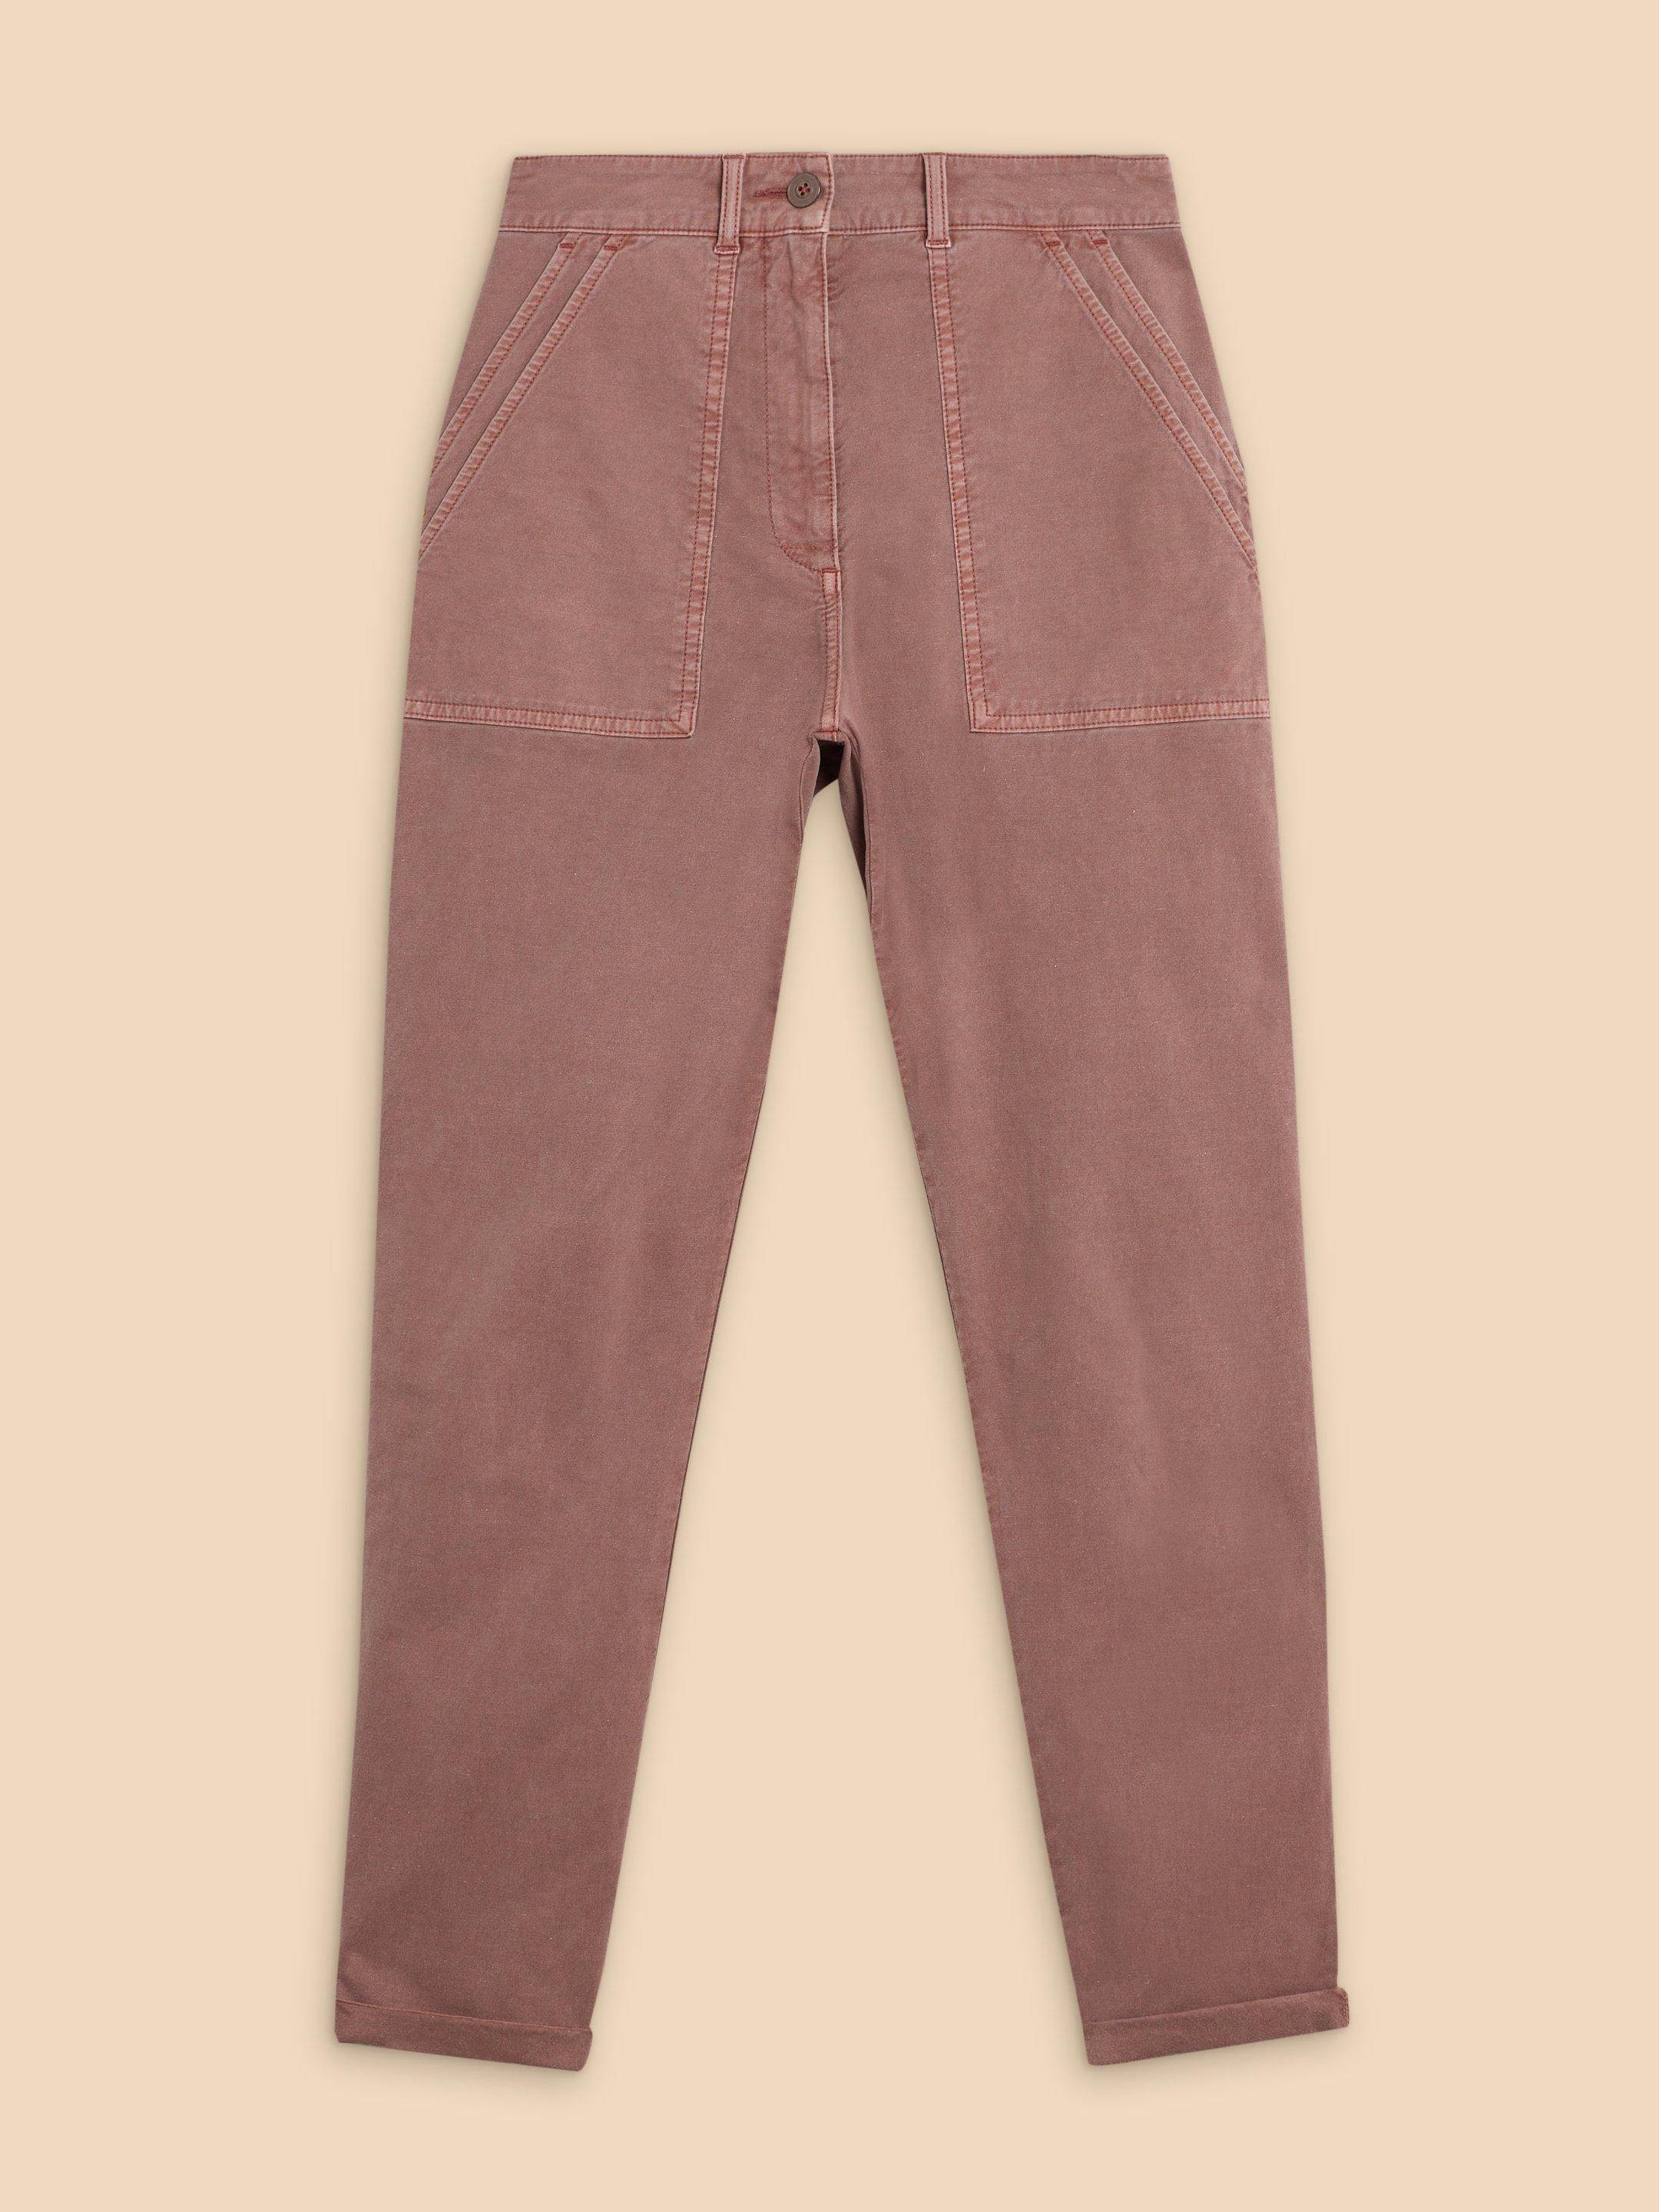 Twister Chino Trouser in DUS PINK - FLAT FRONT